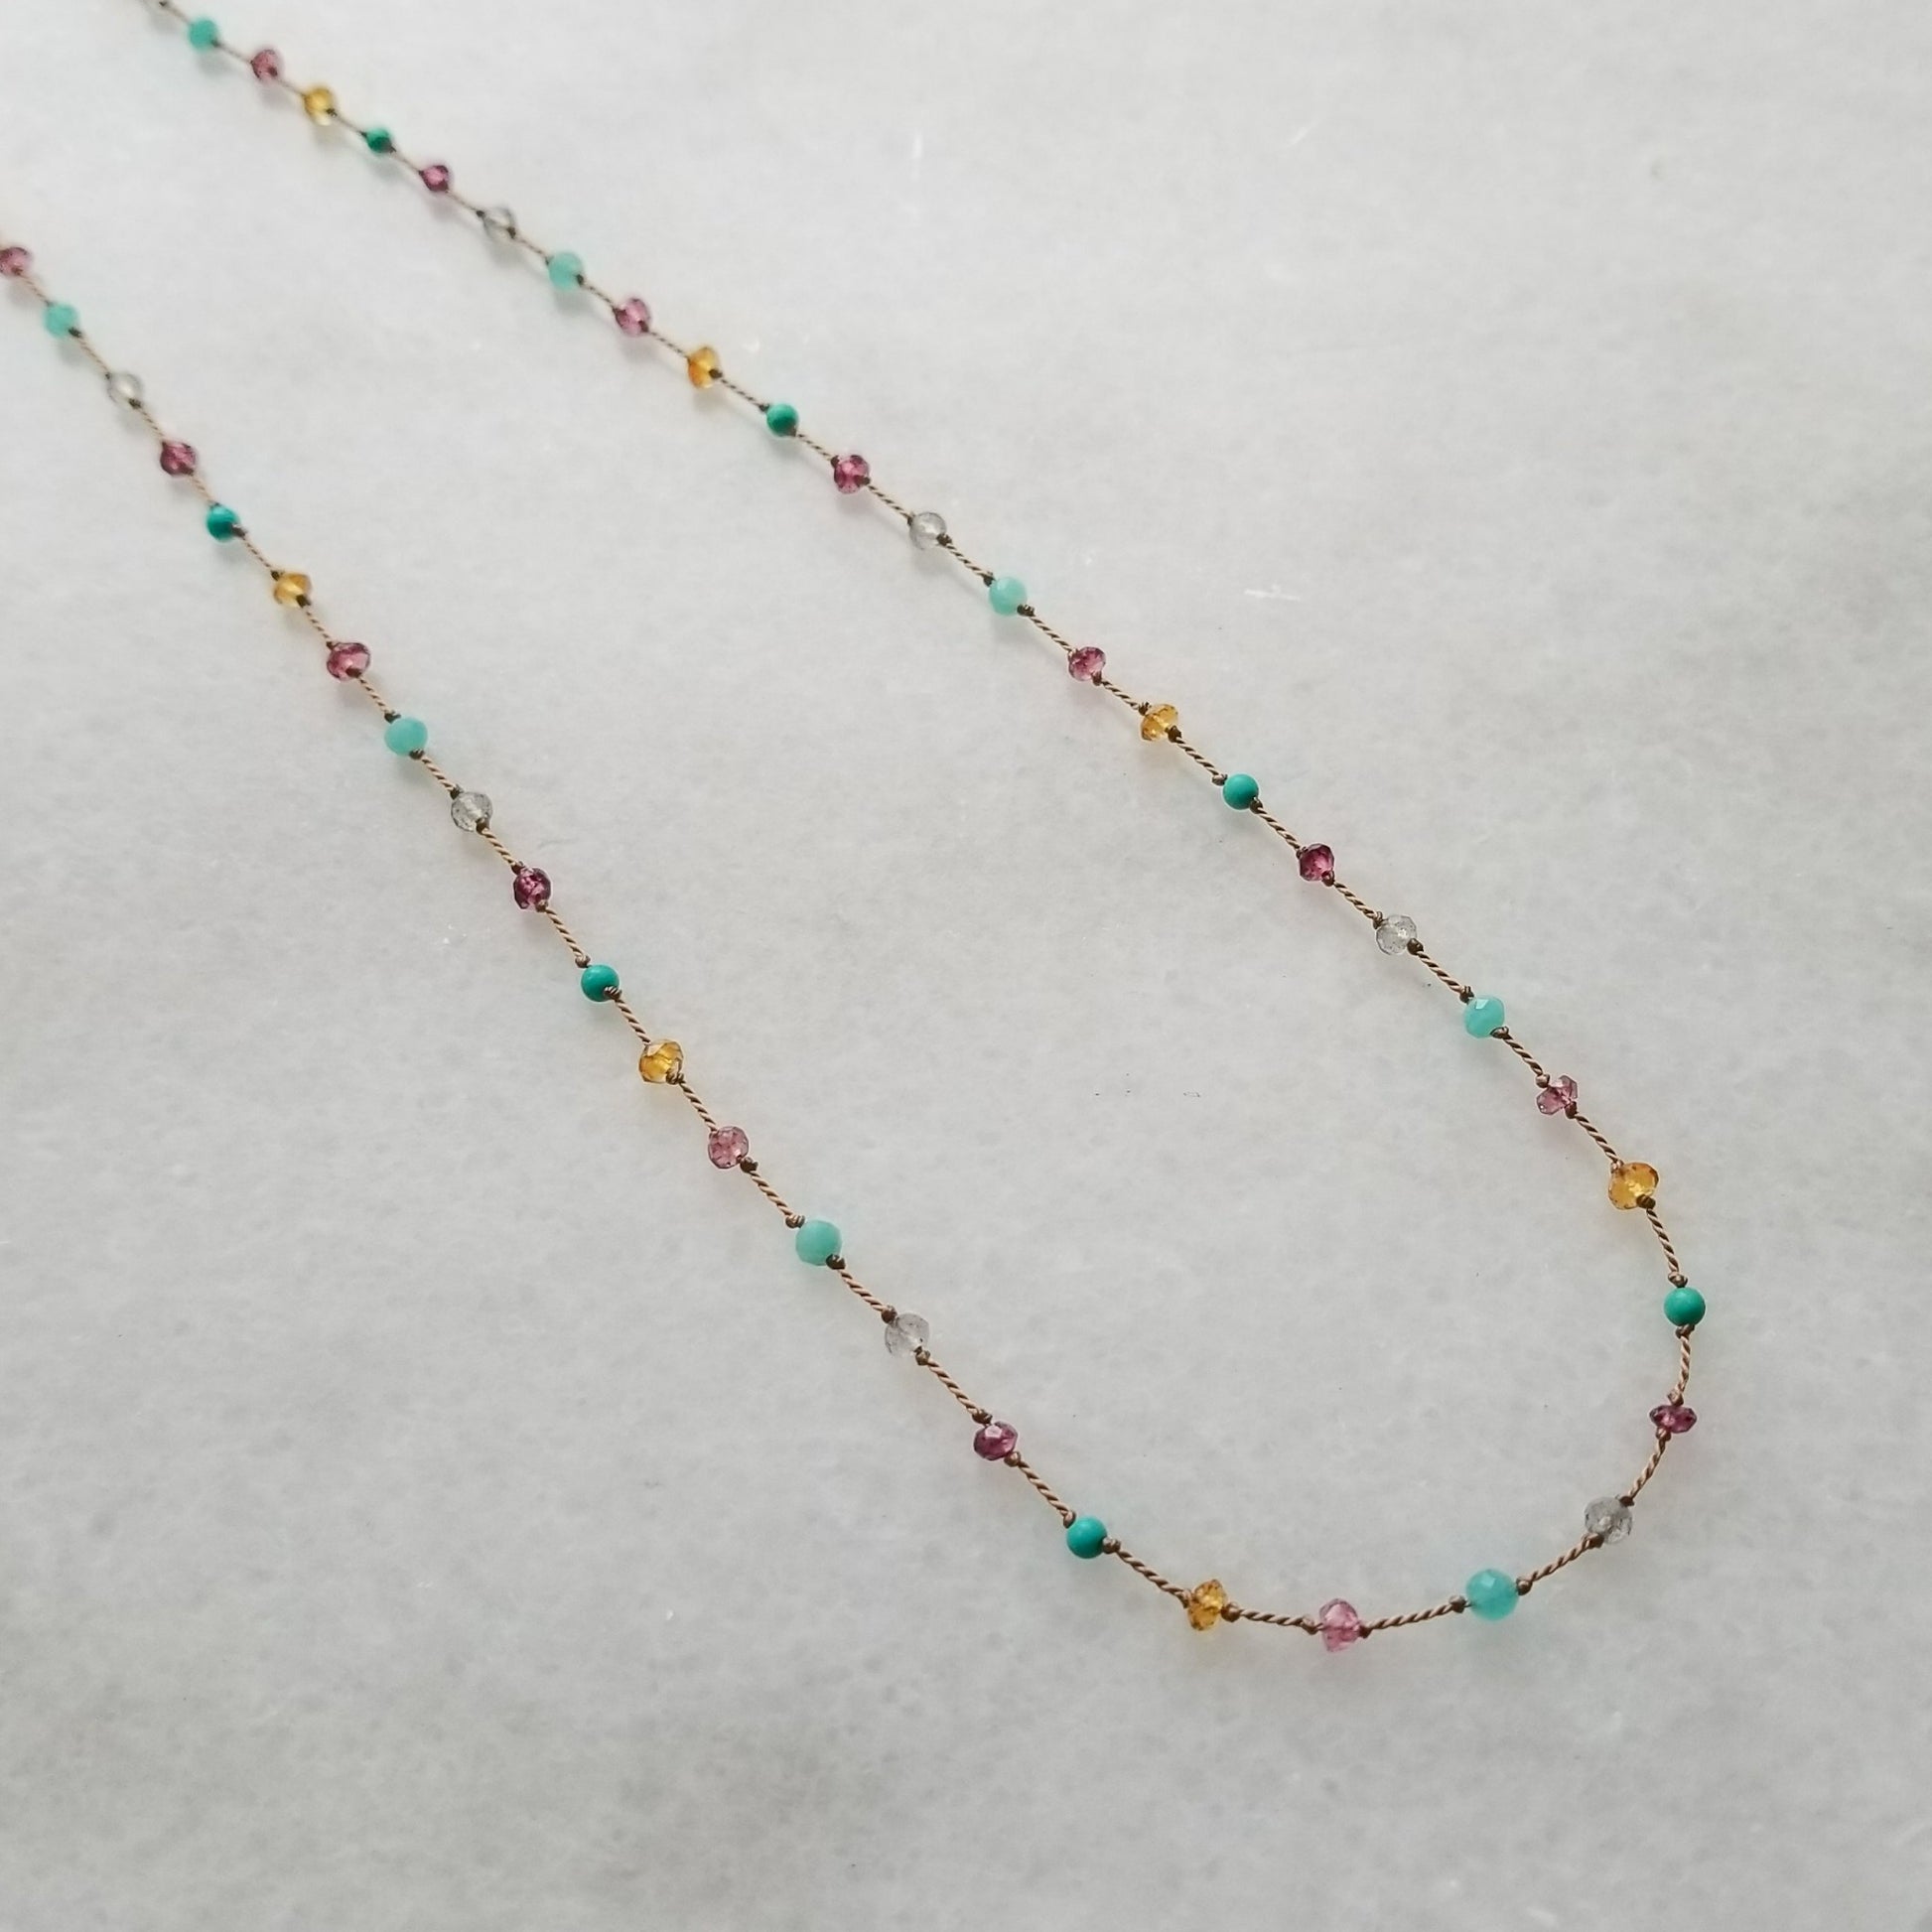 Necklace featuring citrine, labradorite, amazonite, turquoise, pink tourmaline, and garnets evenly spaced, knotted on beige silk cord, is displayed on a white marble background.